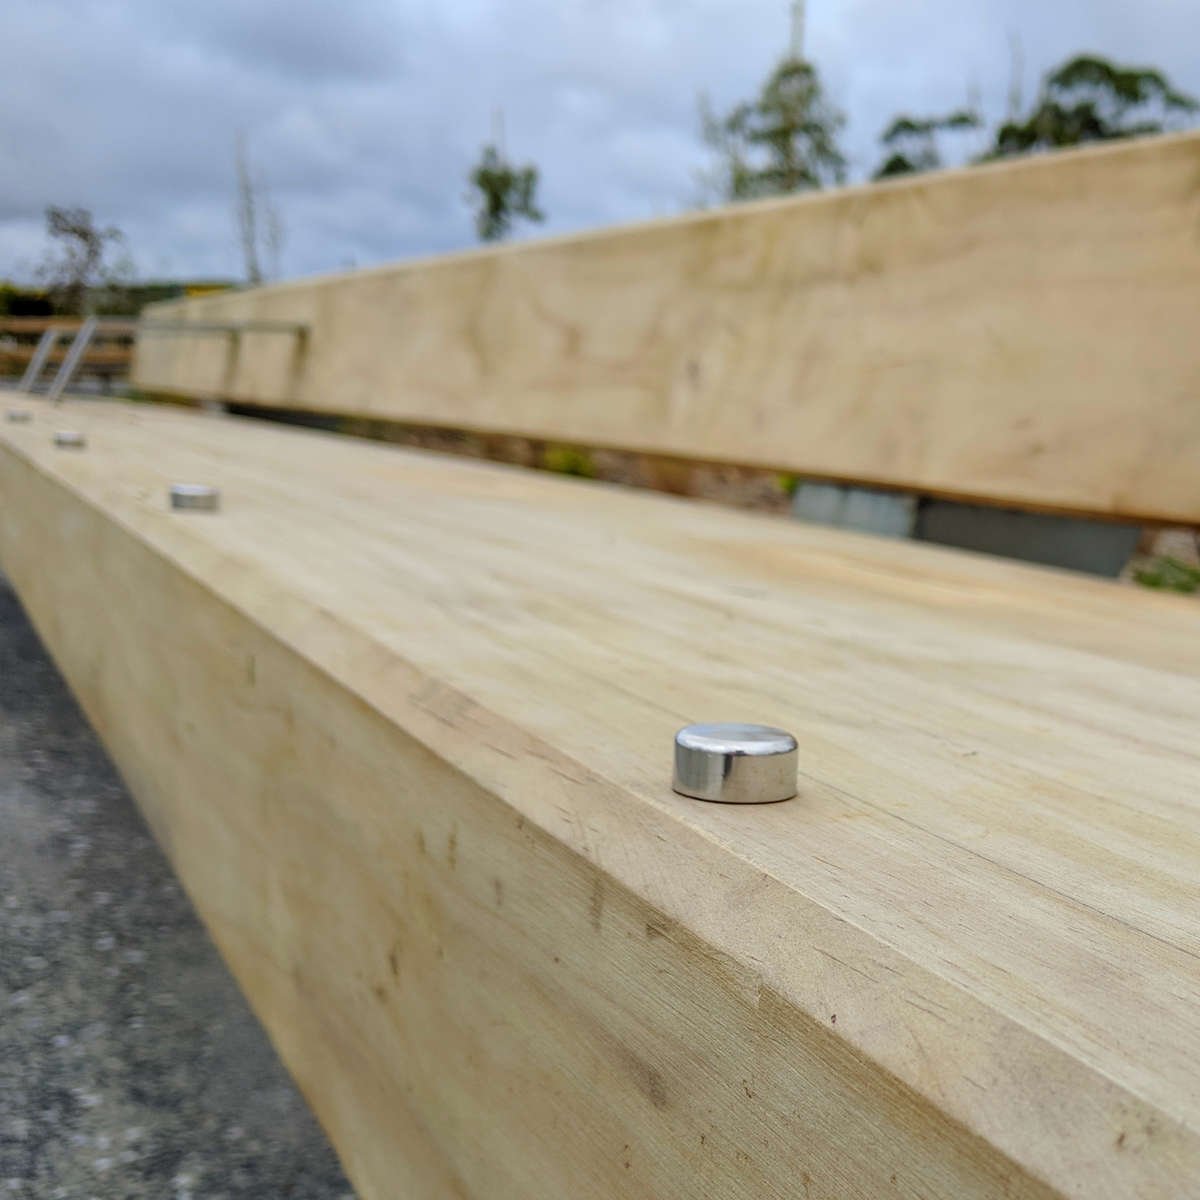 Close-up of TacPro stainless steel skateboard deterrents on timber seating 